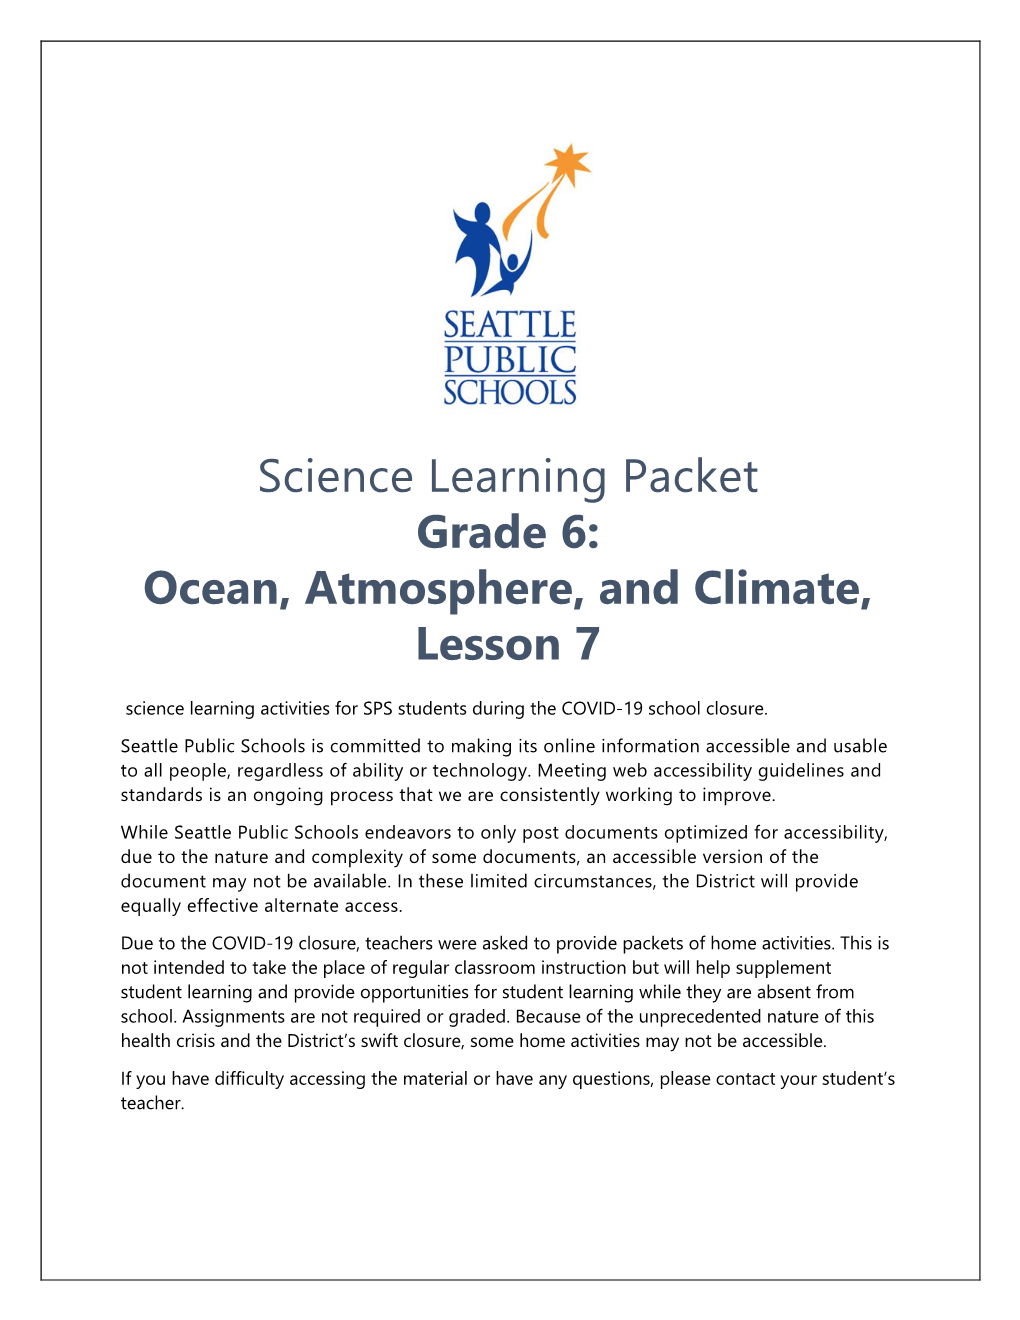 Ocean, Atmosphere, and Climate, Lesson 7